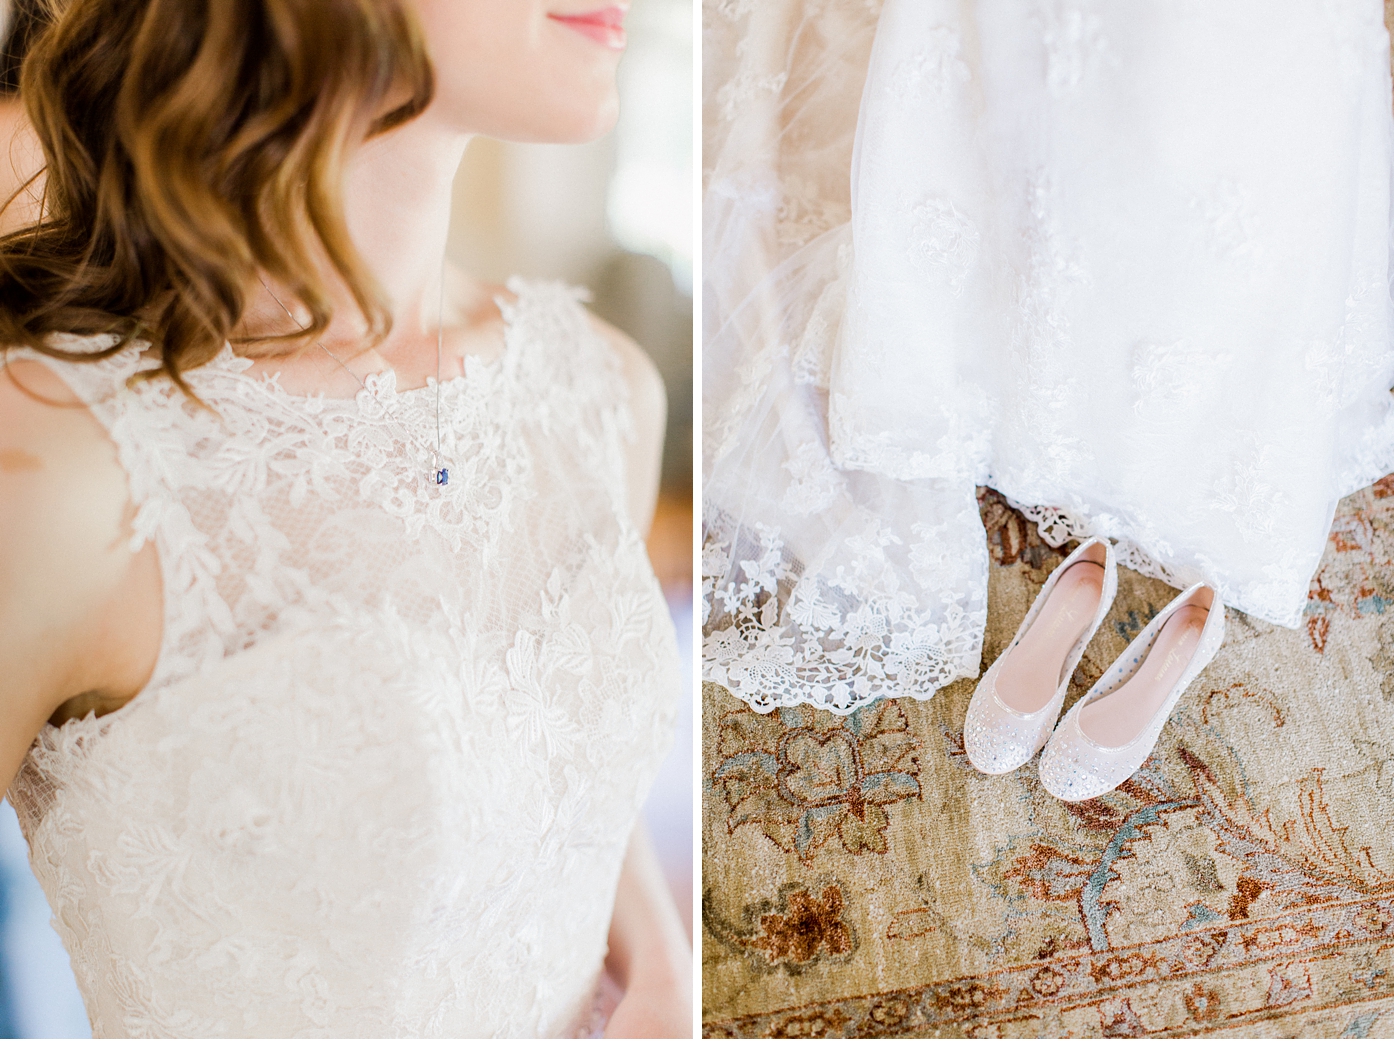 Intimate Wedding in Richmond Virginia at the Armour House